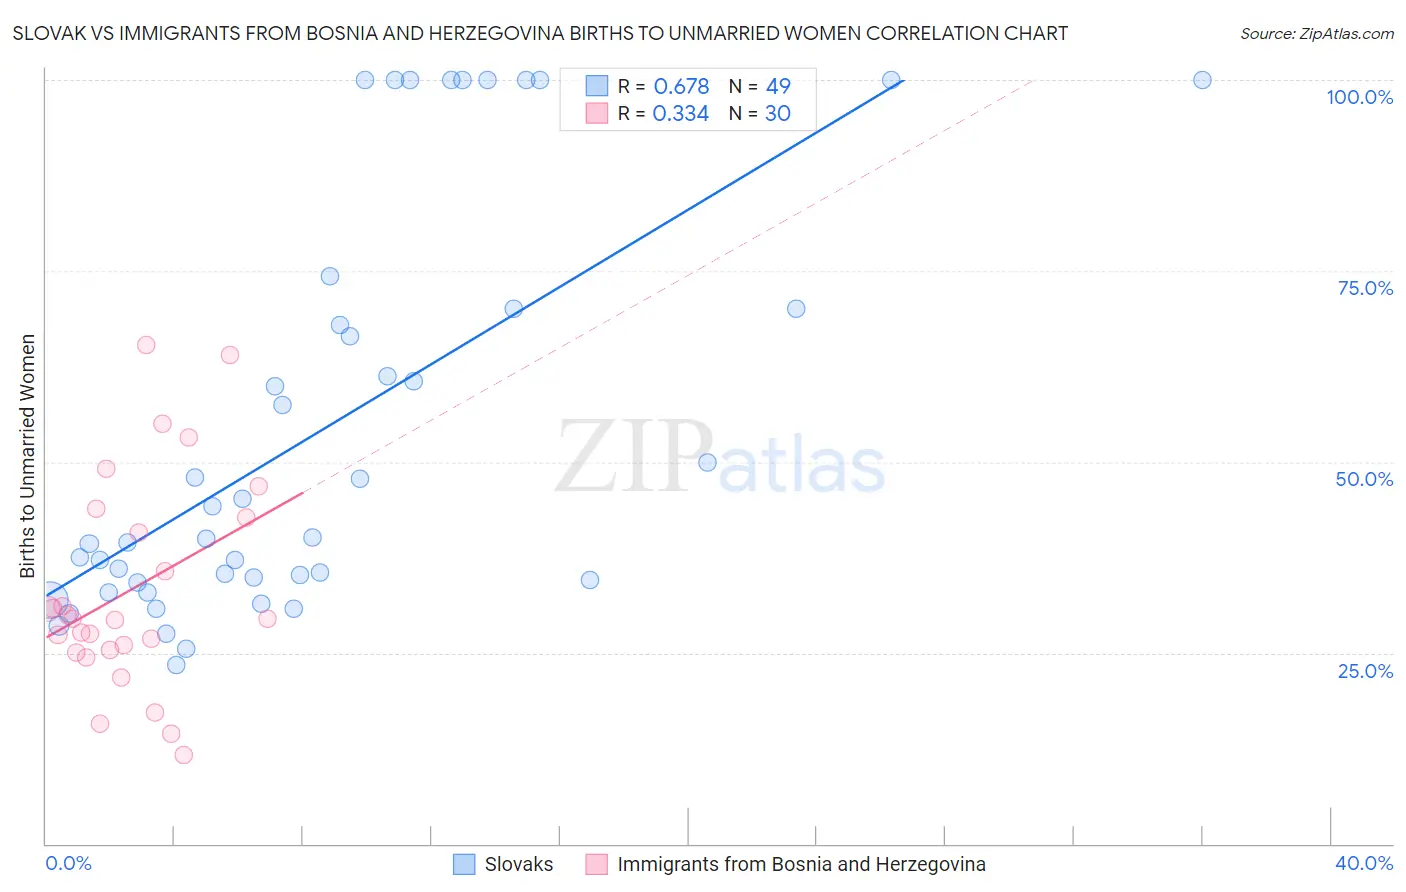 Slovak vs Immigrants from Bosnia and Herzegovina Births to Unmarried Women